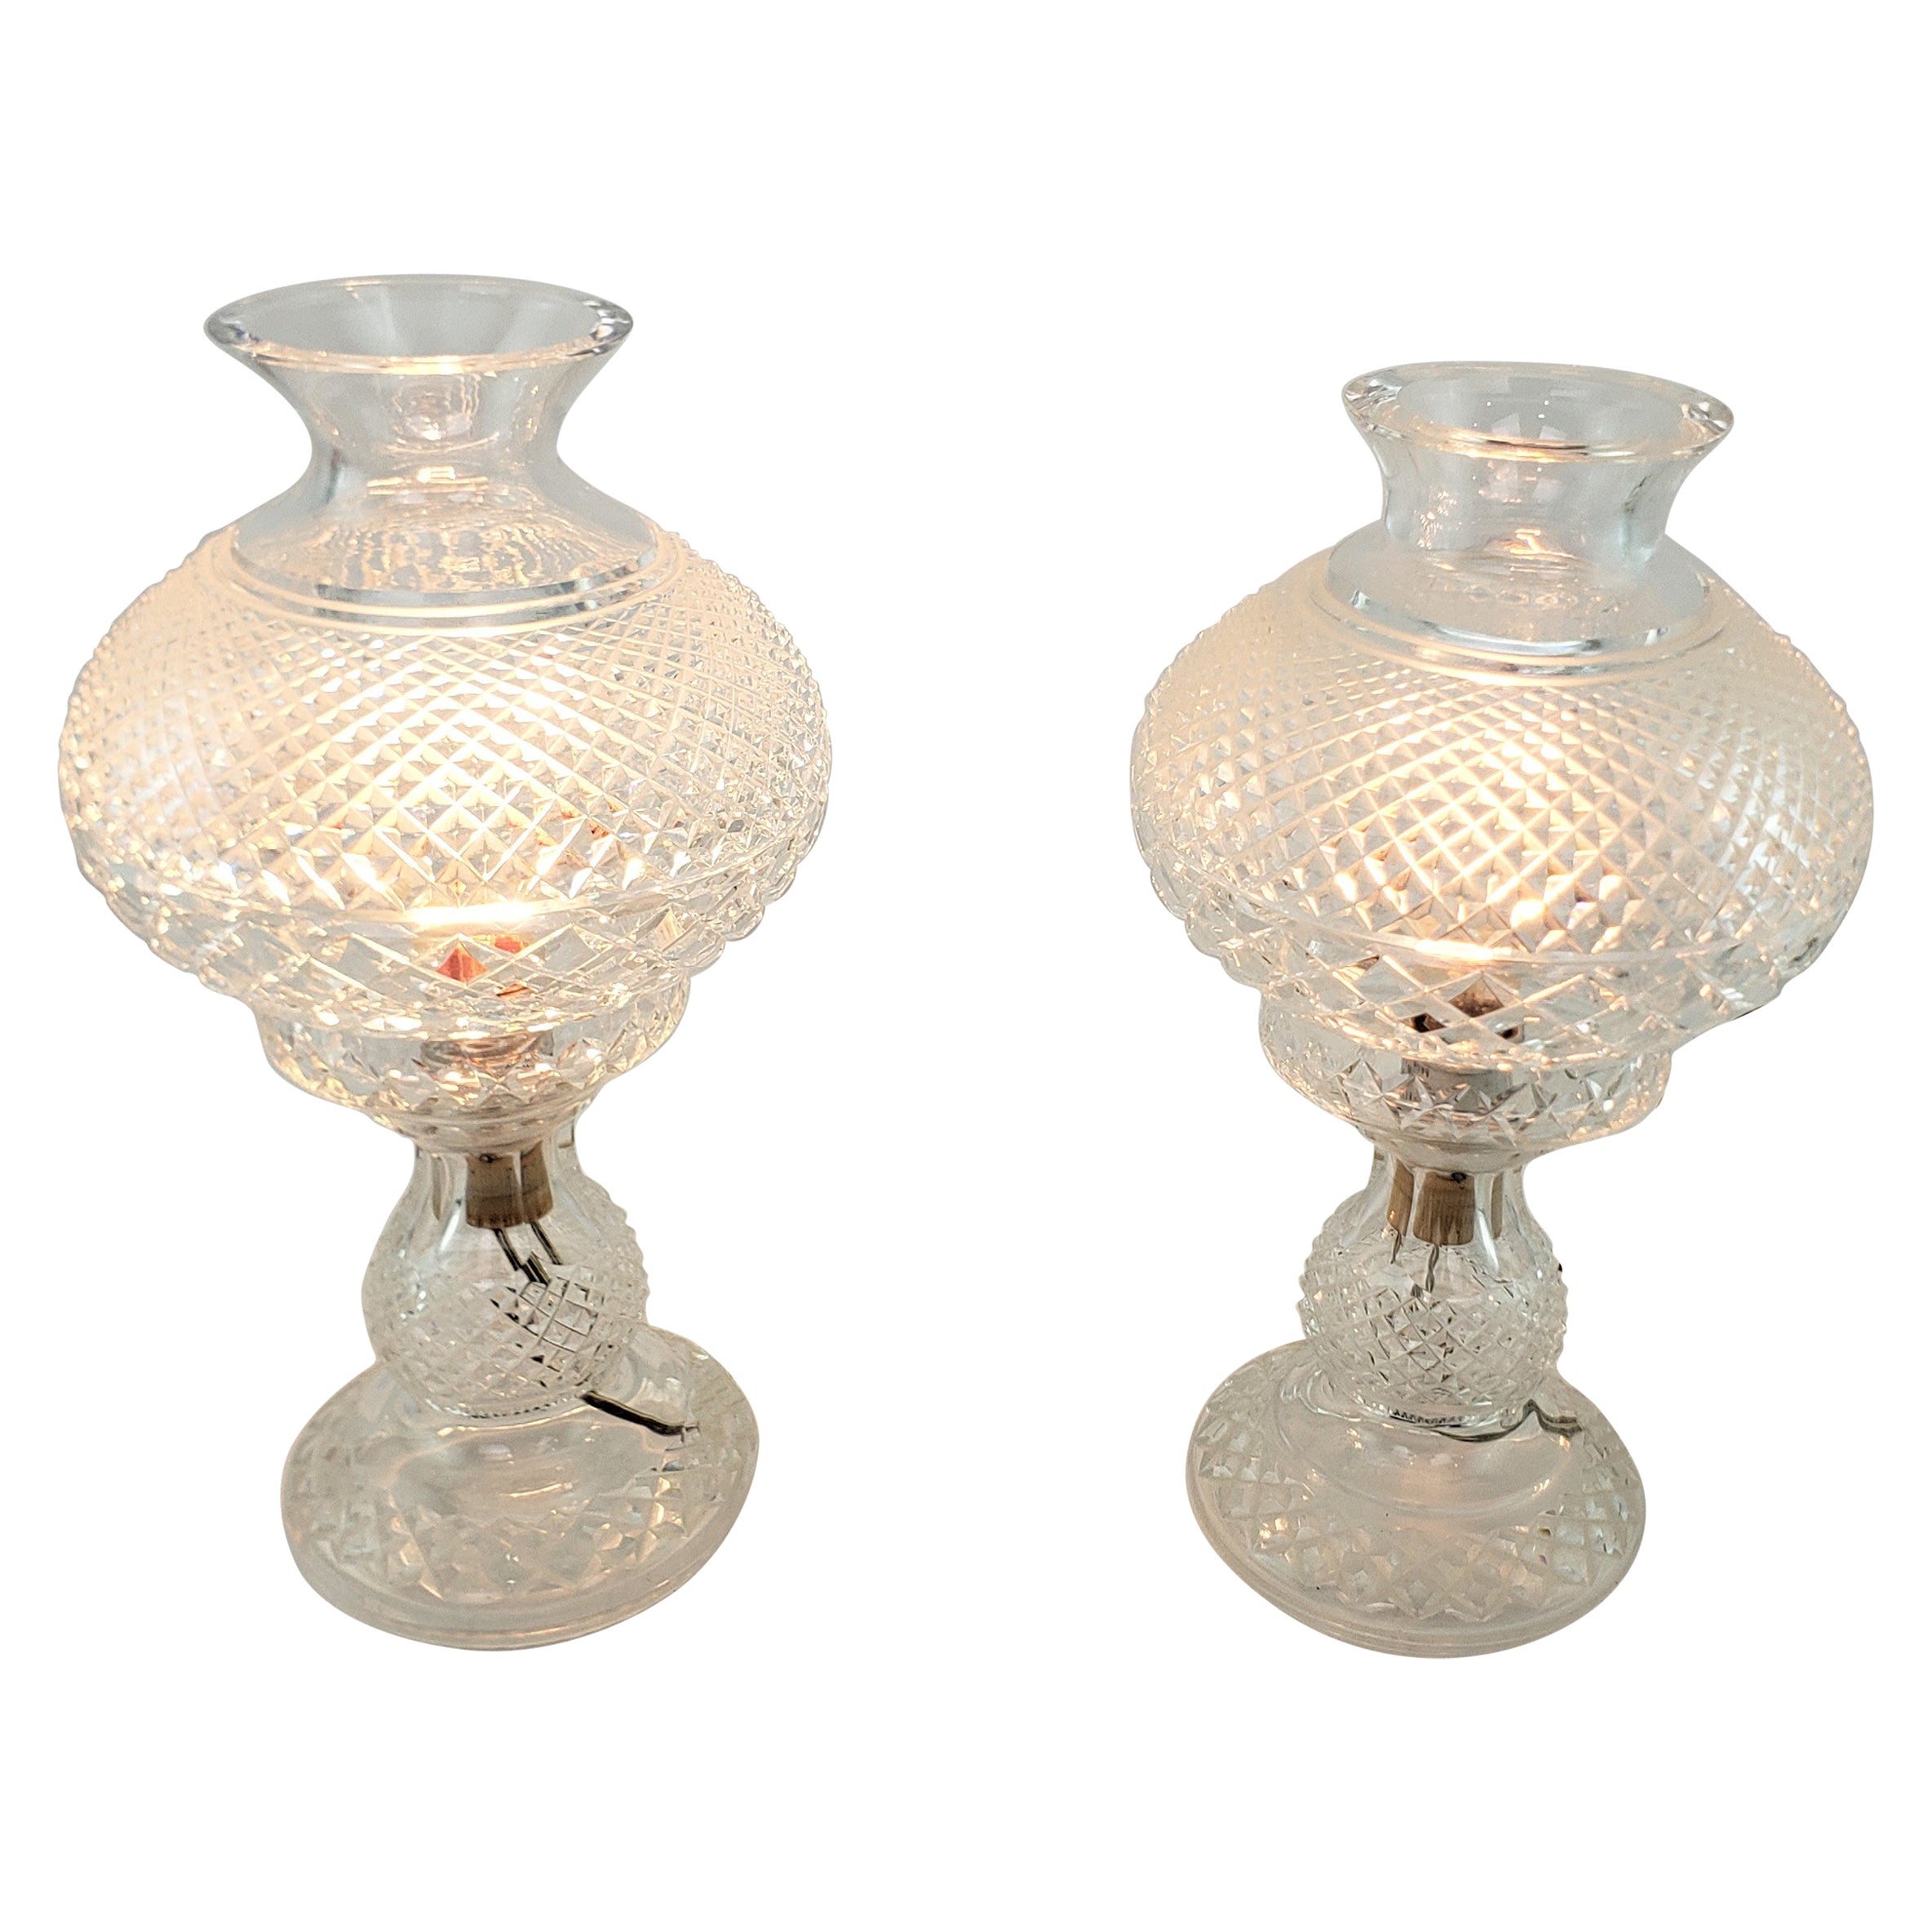 Pair of Antique Waterford Crystal Alana Inishmaan Hurricane Table Lamps For Sale